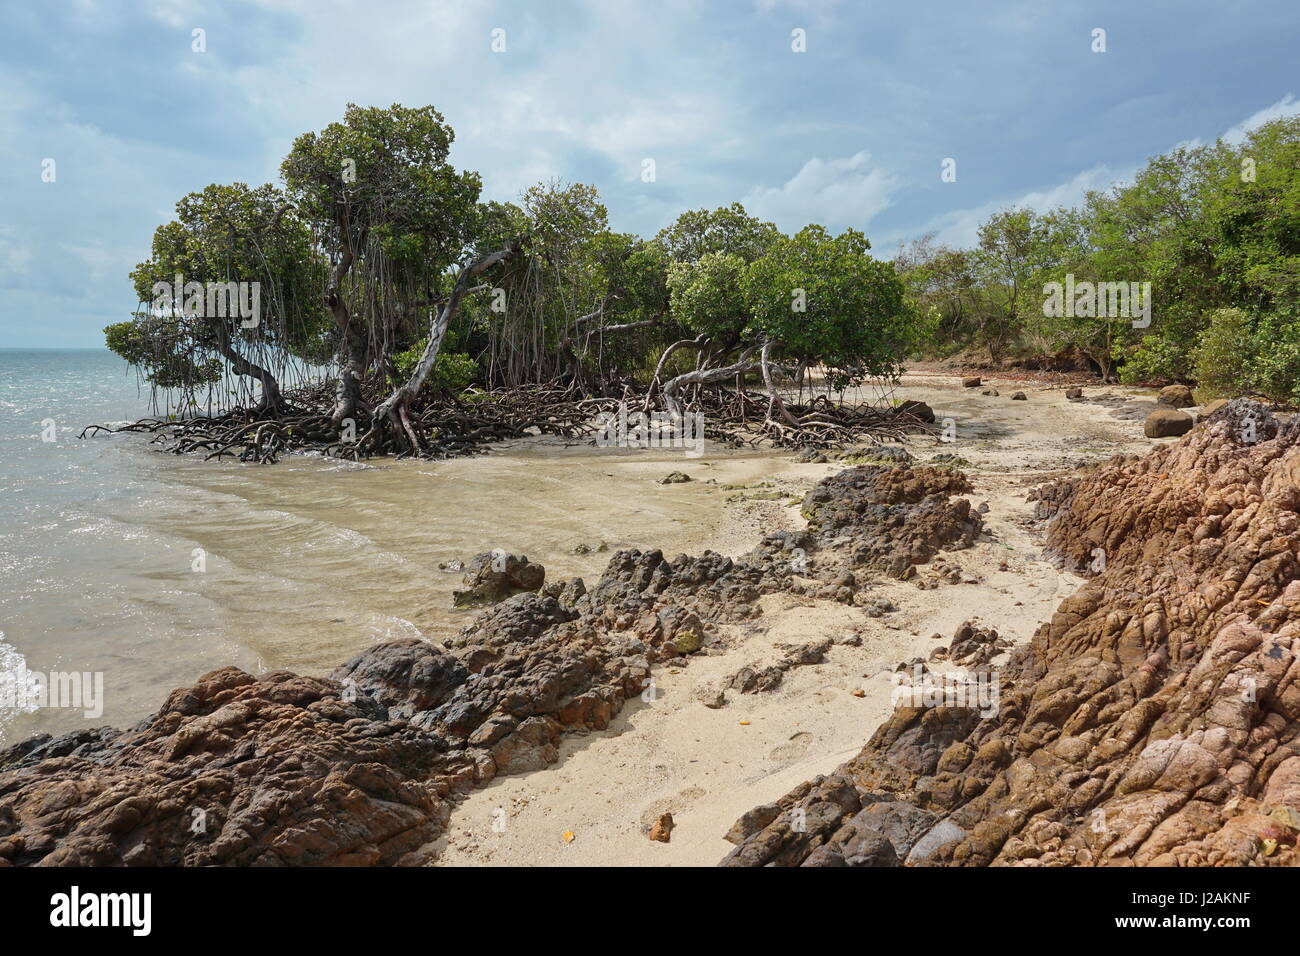 Mangroves on seashore with sand and rocks, West coast of Grande Terre island, New Caledonia, south Pacific Stock Photo